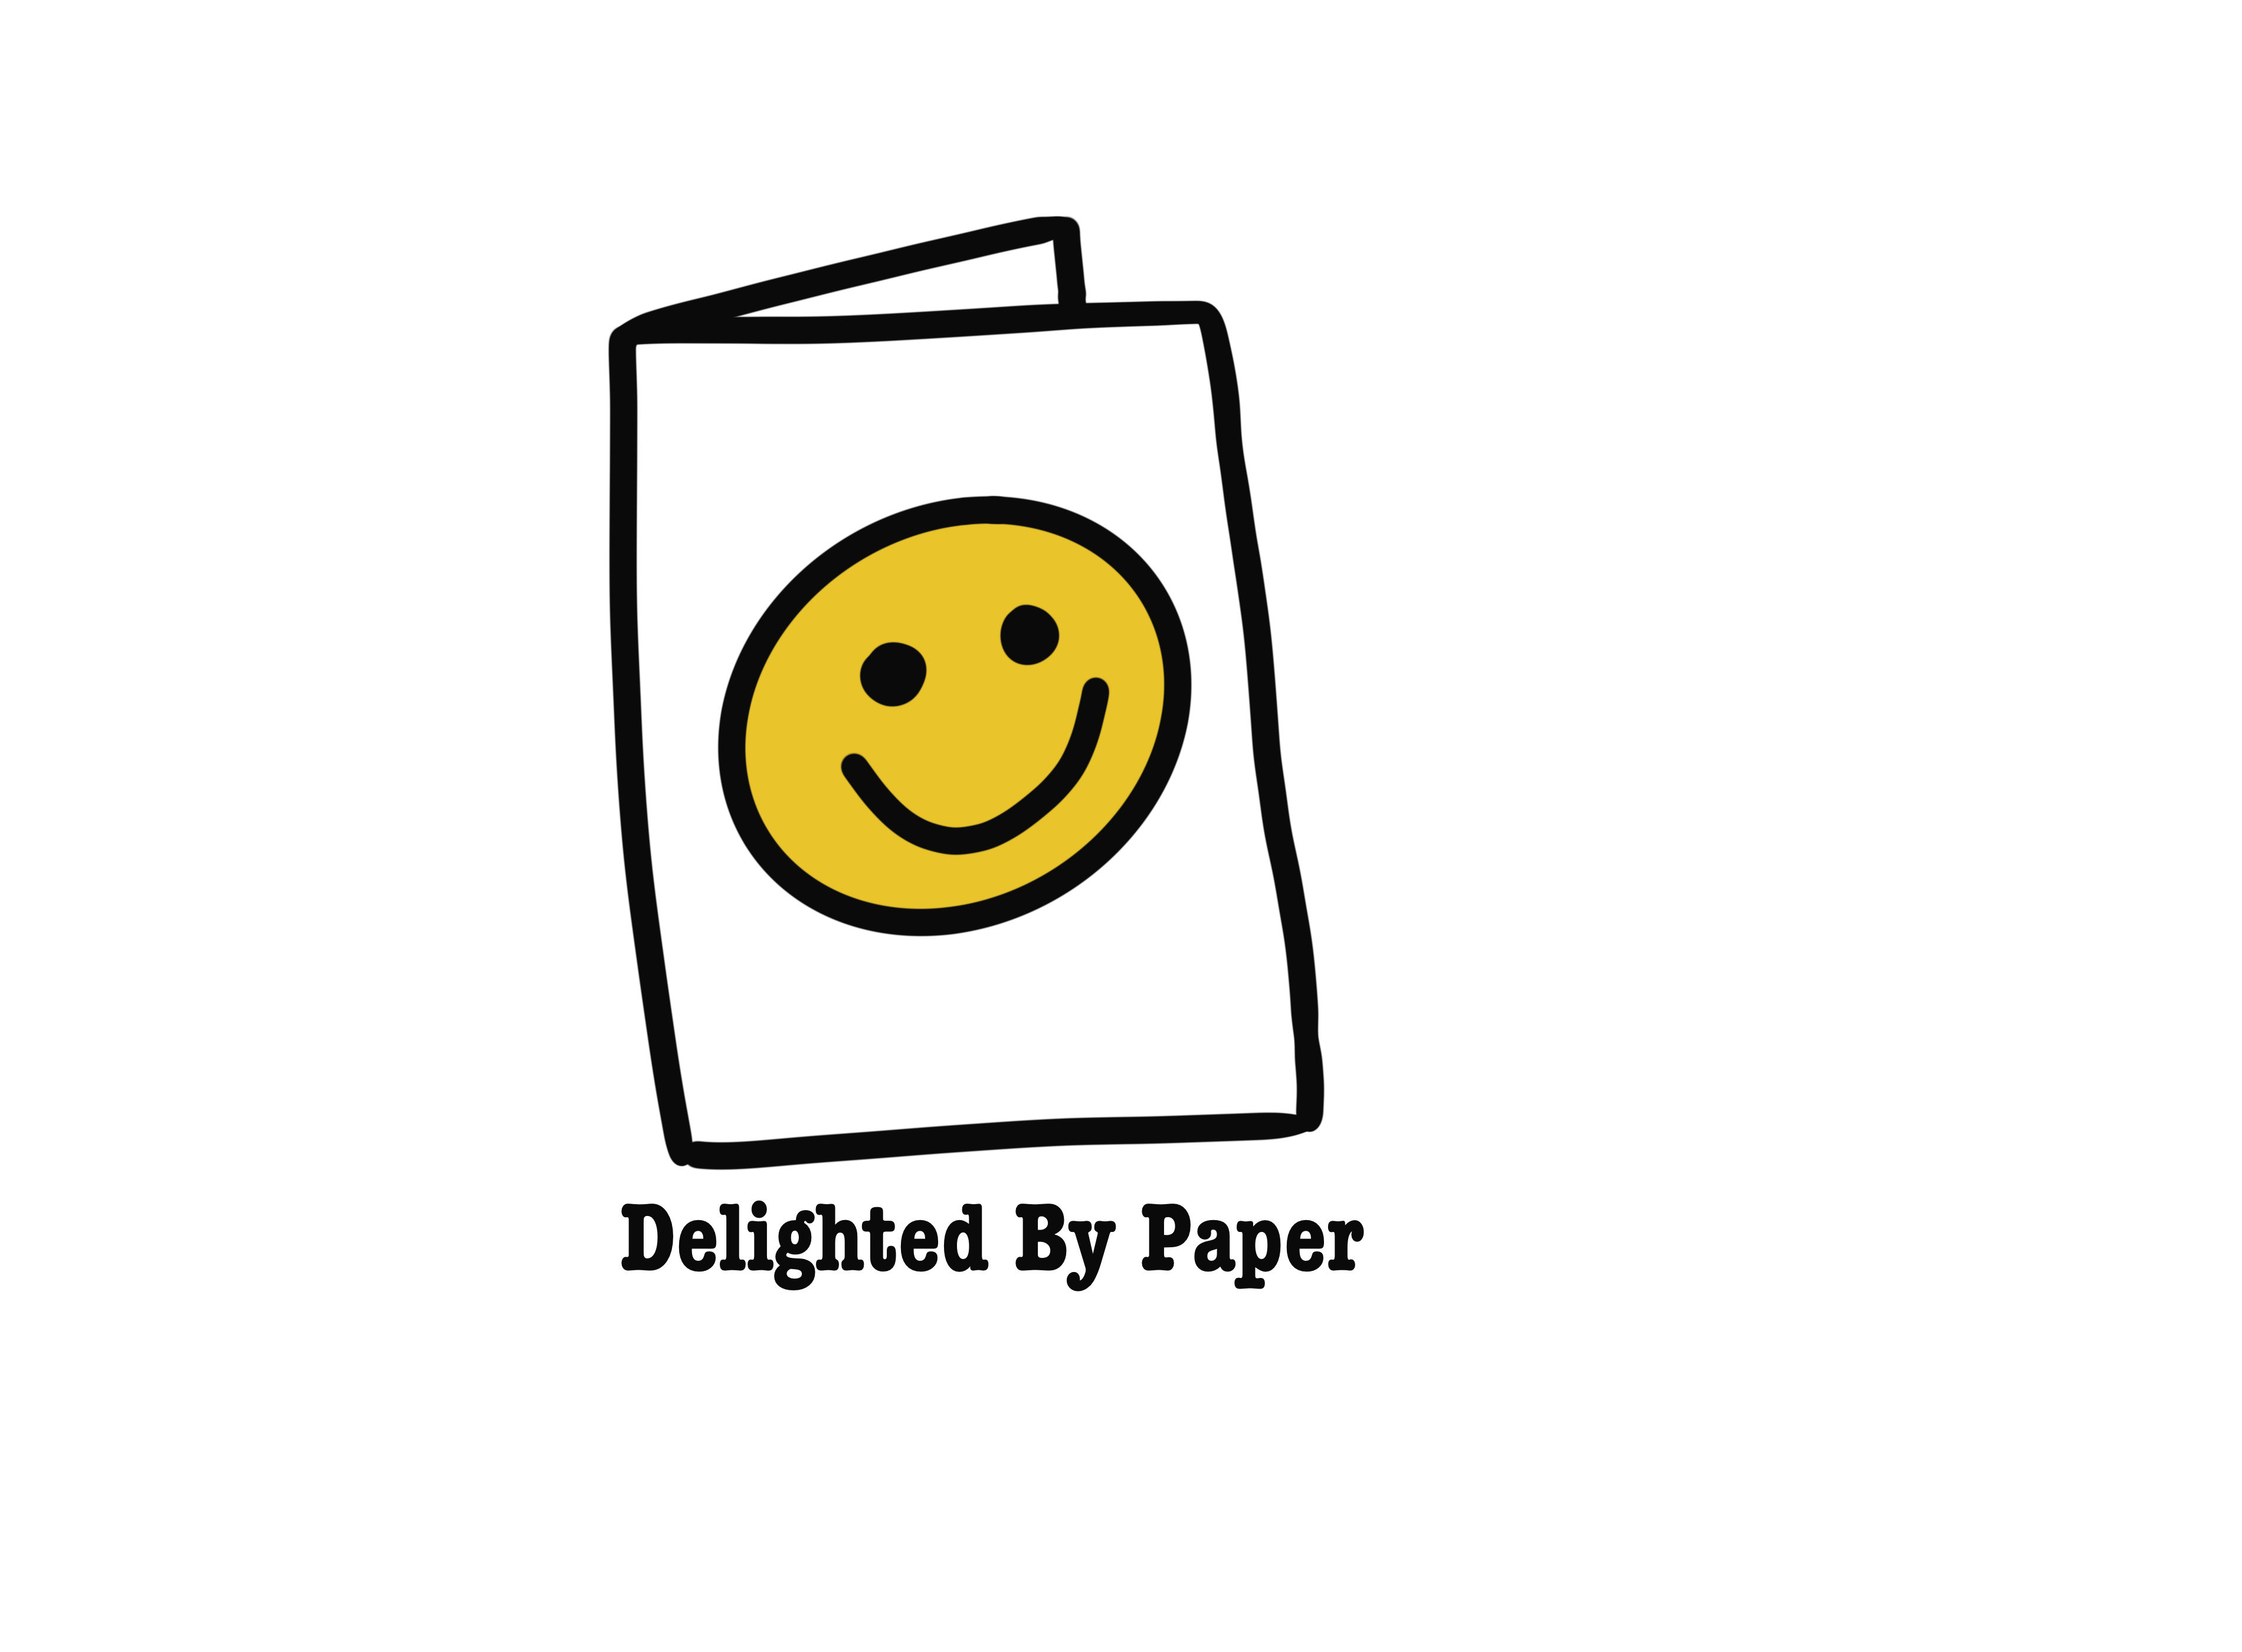 Delighted by Paper